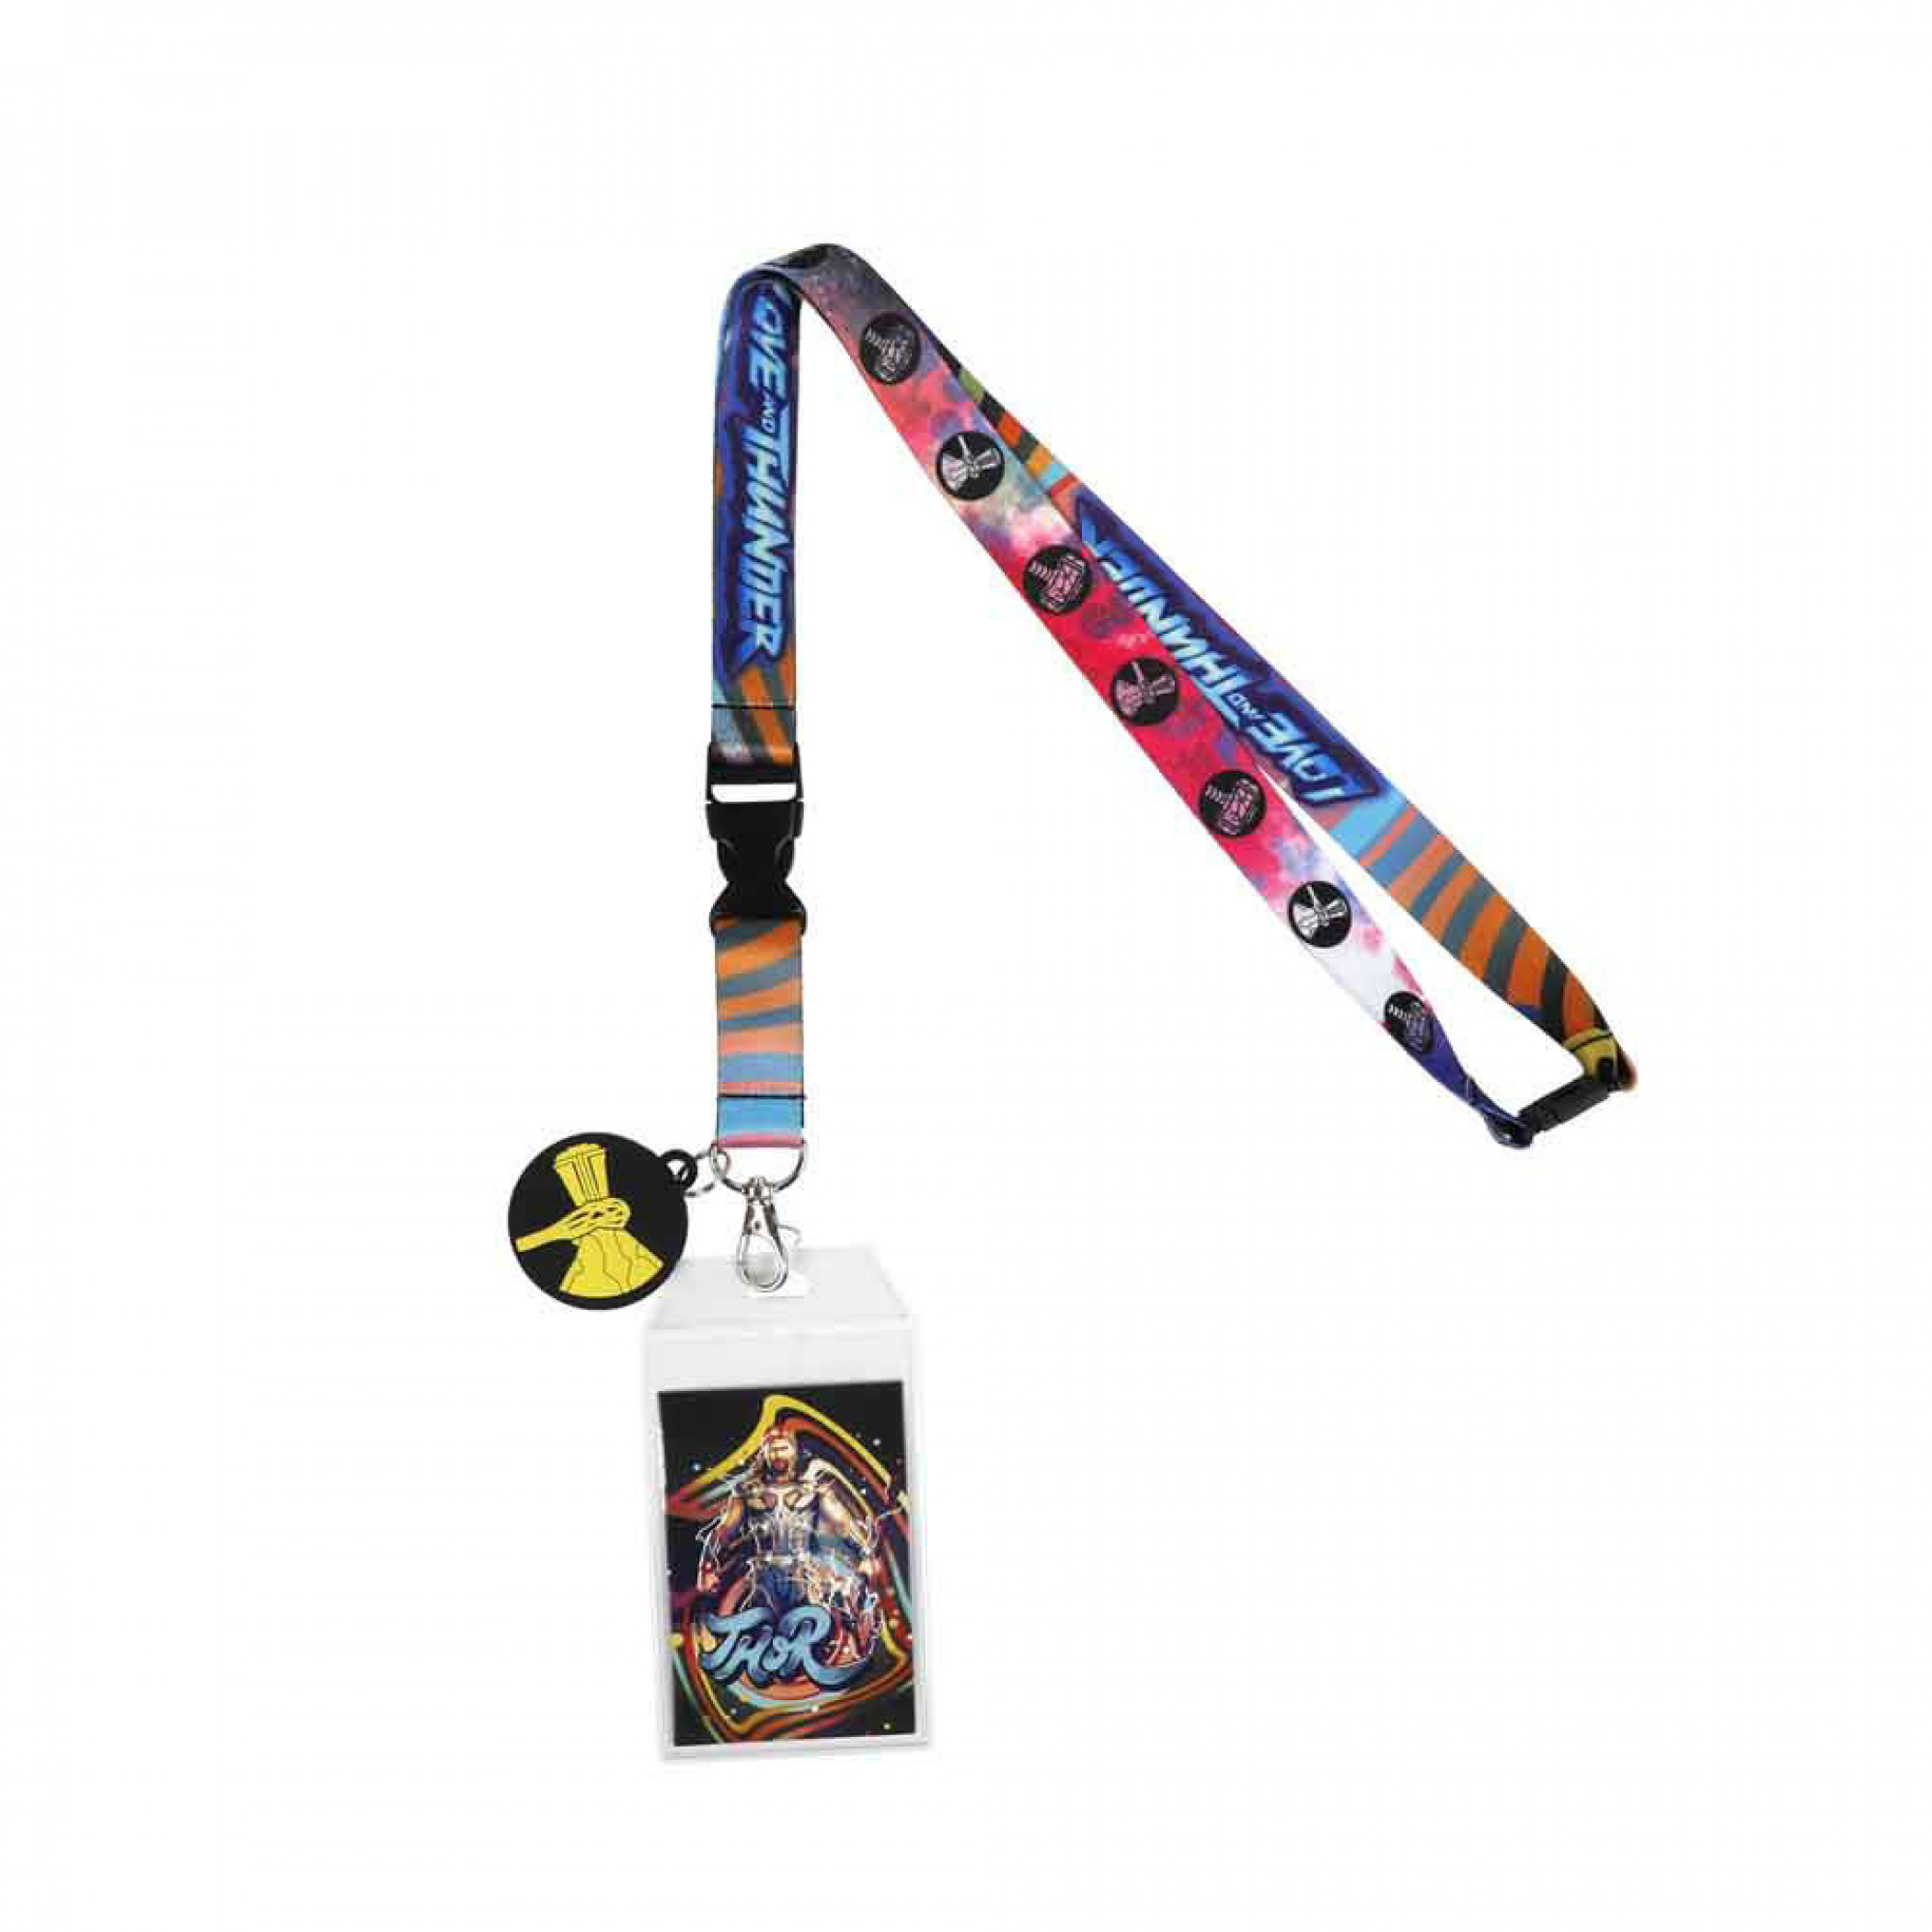 Thor Love and Thunder Lanyard with Rubber Charm